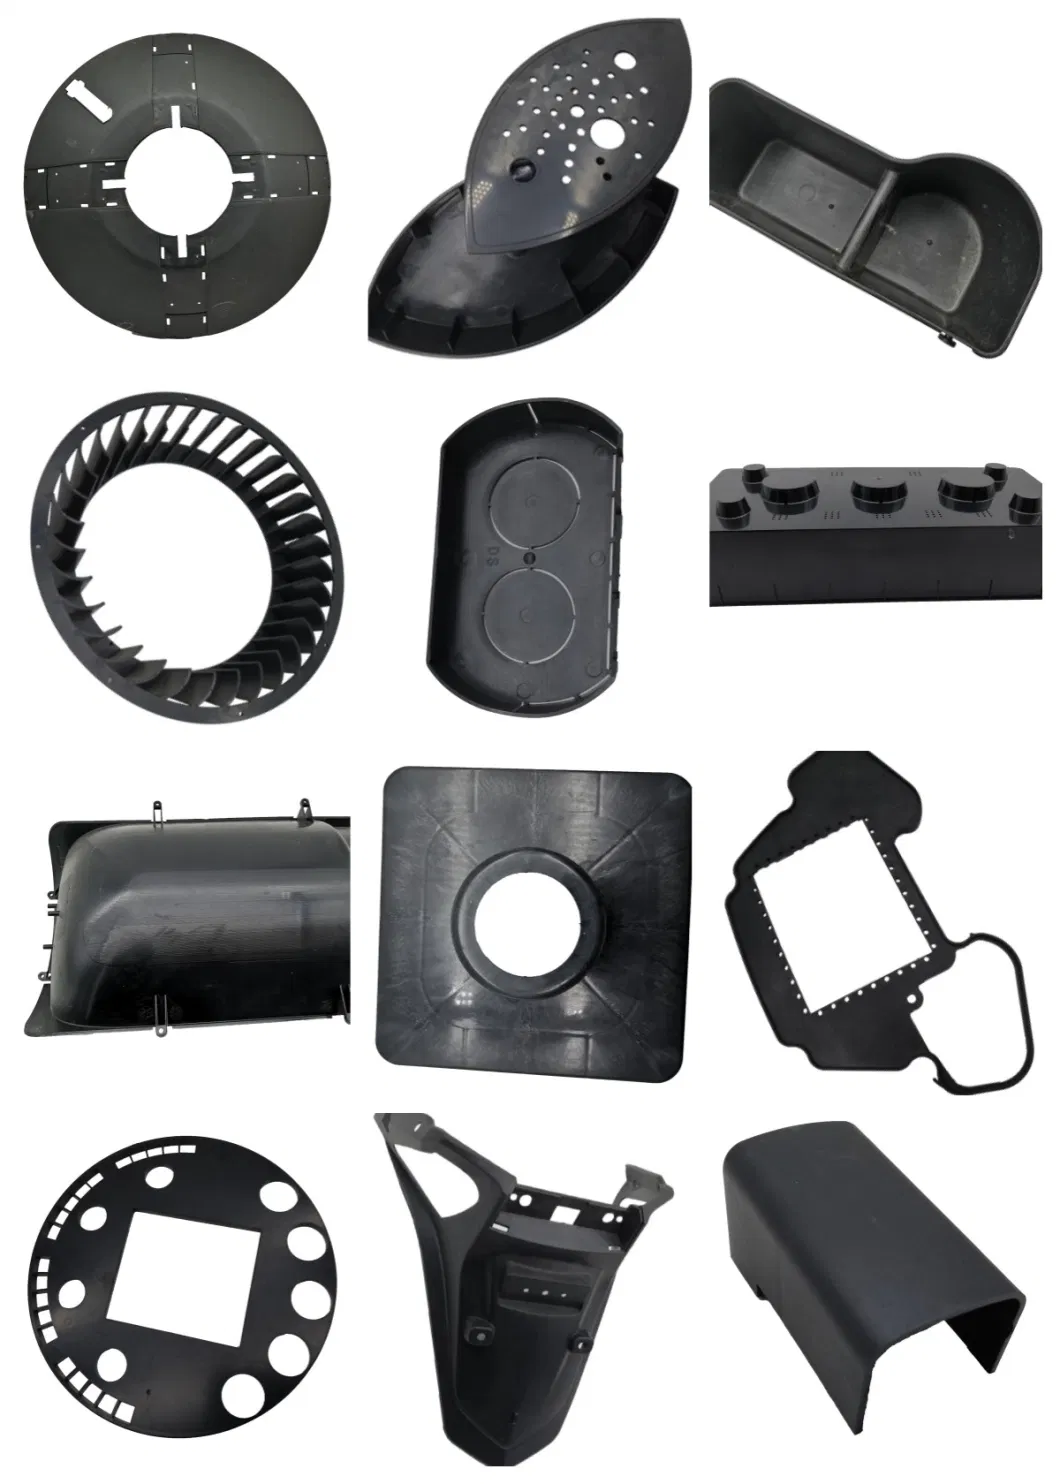 Precision Plastic Injection Mould ABS Precision Plastic Injection Component Molding